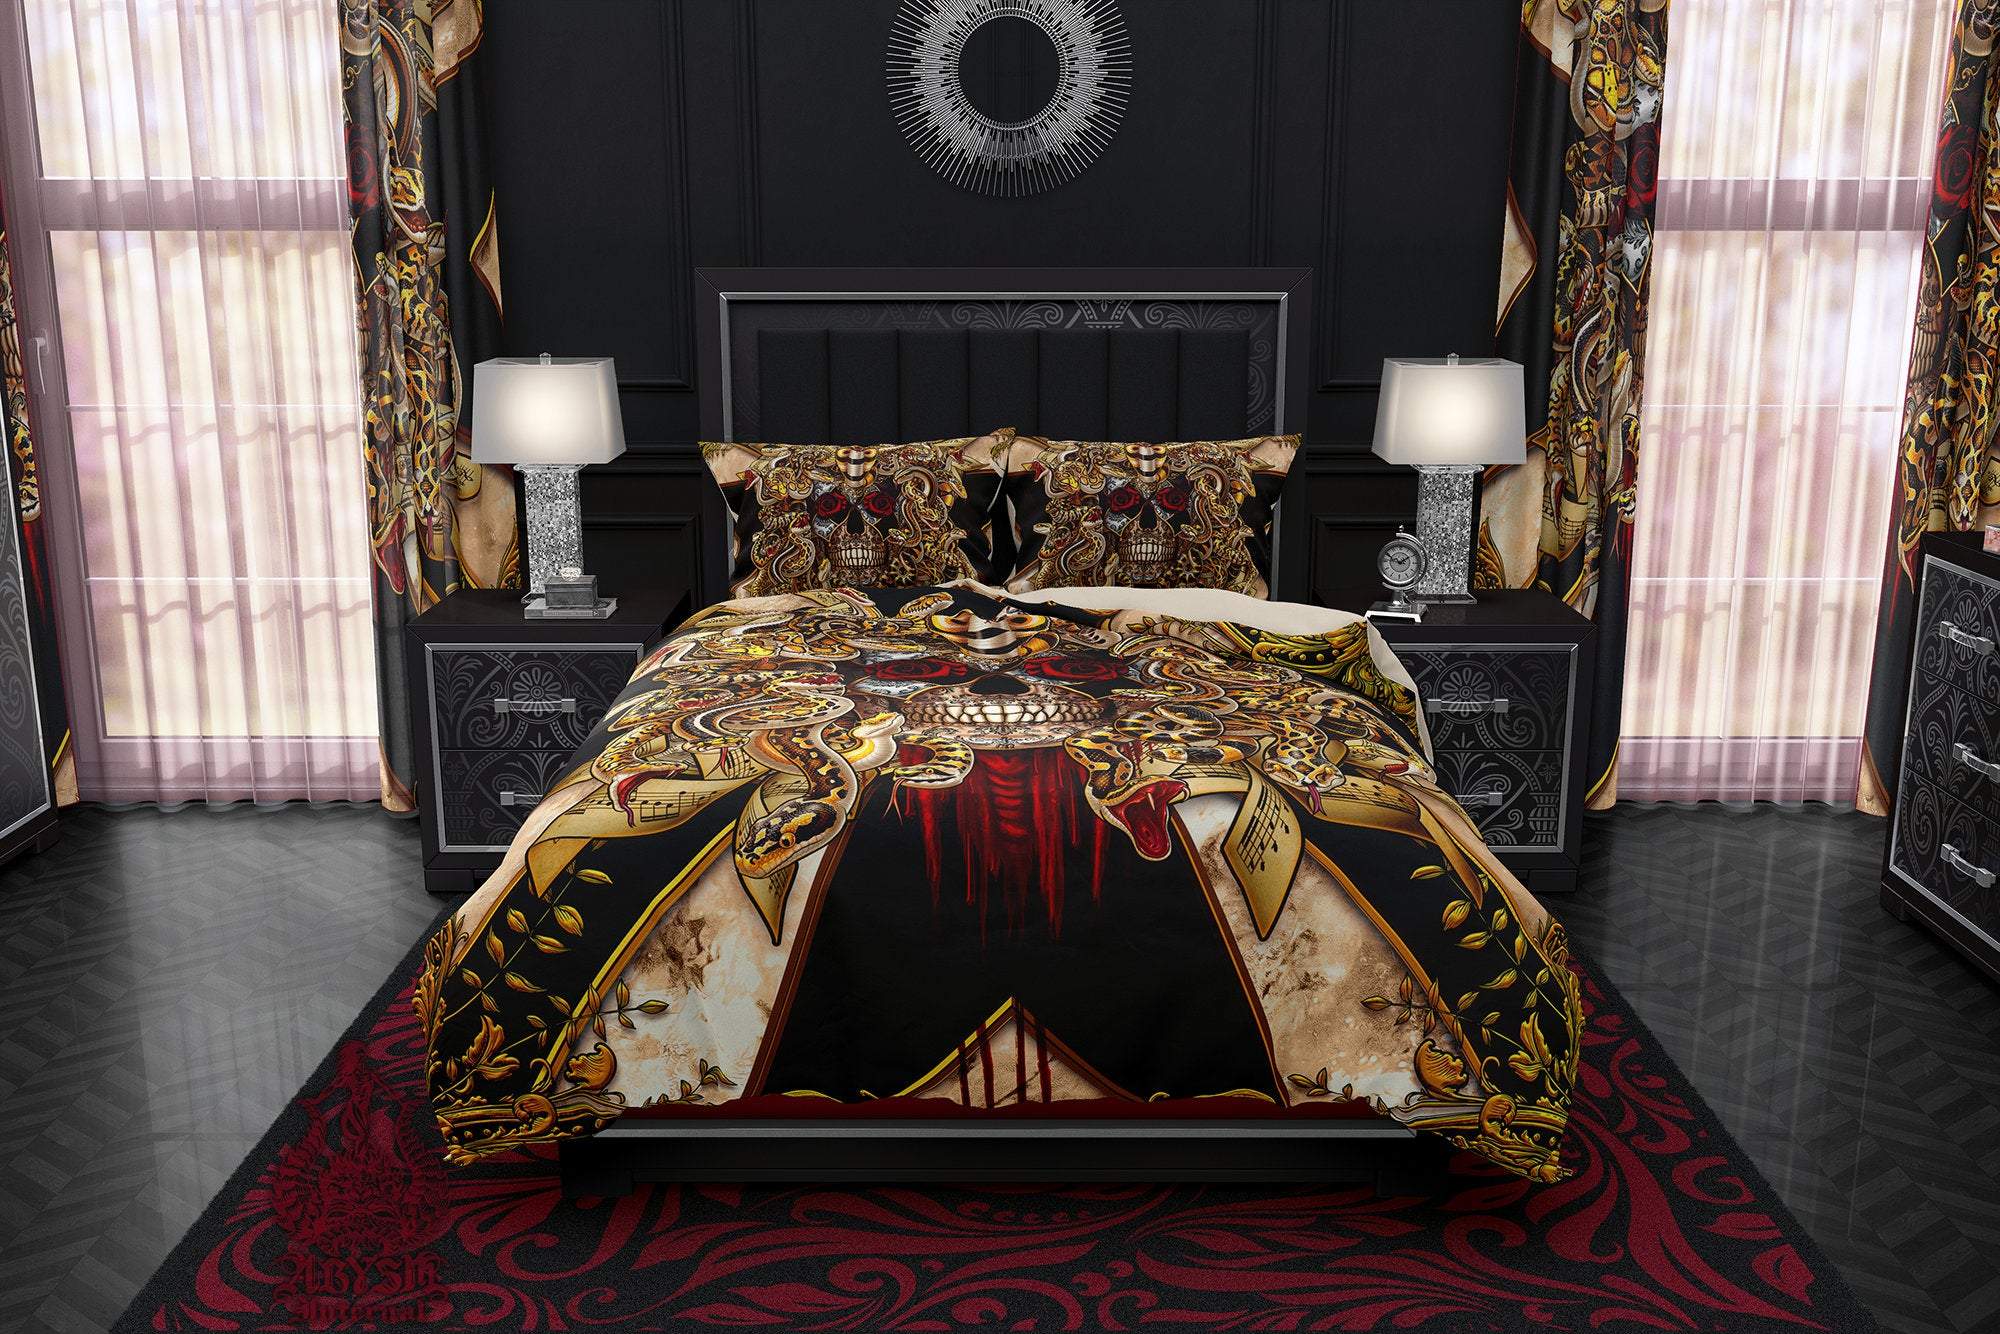 Skull Bedding Set, Comforter and Duvet, Gothic Carnival Bed Cover and Bedroom Decor, King, Queen and Twin Size - Black Harlequin Medusa - Abysm Internal